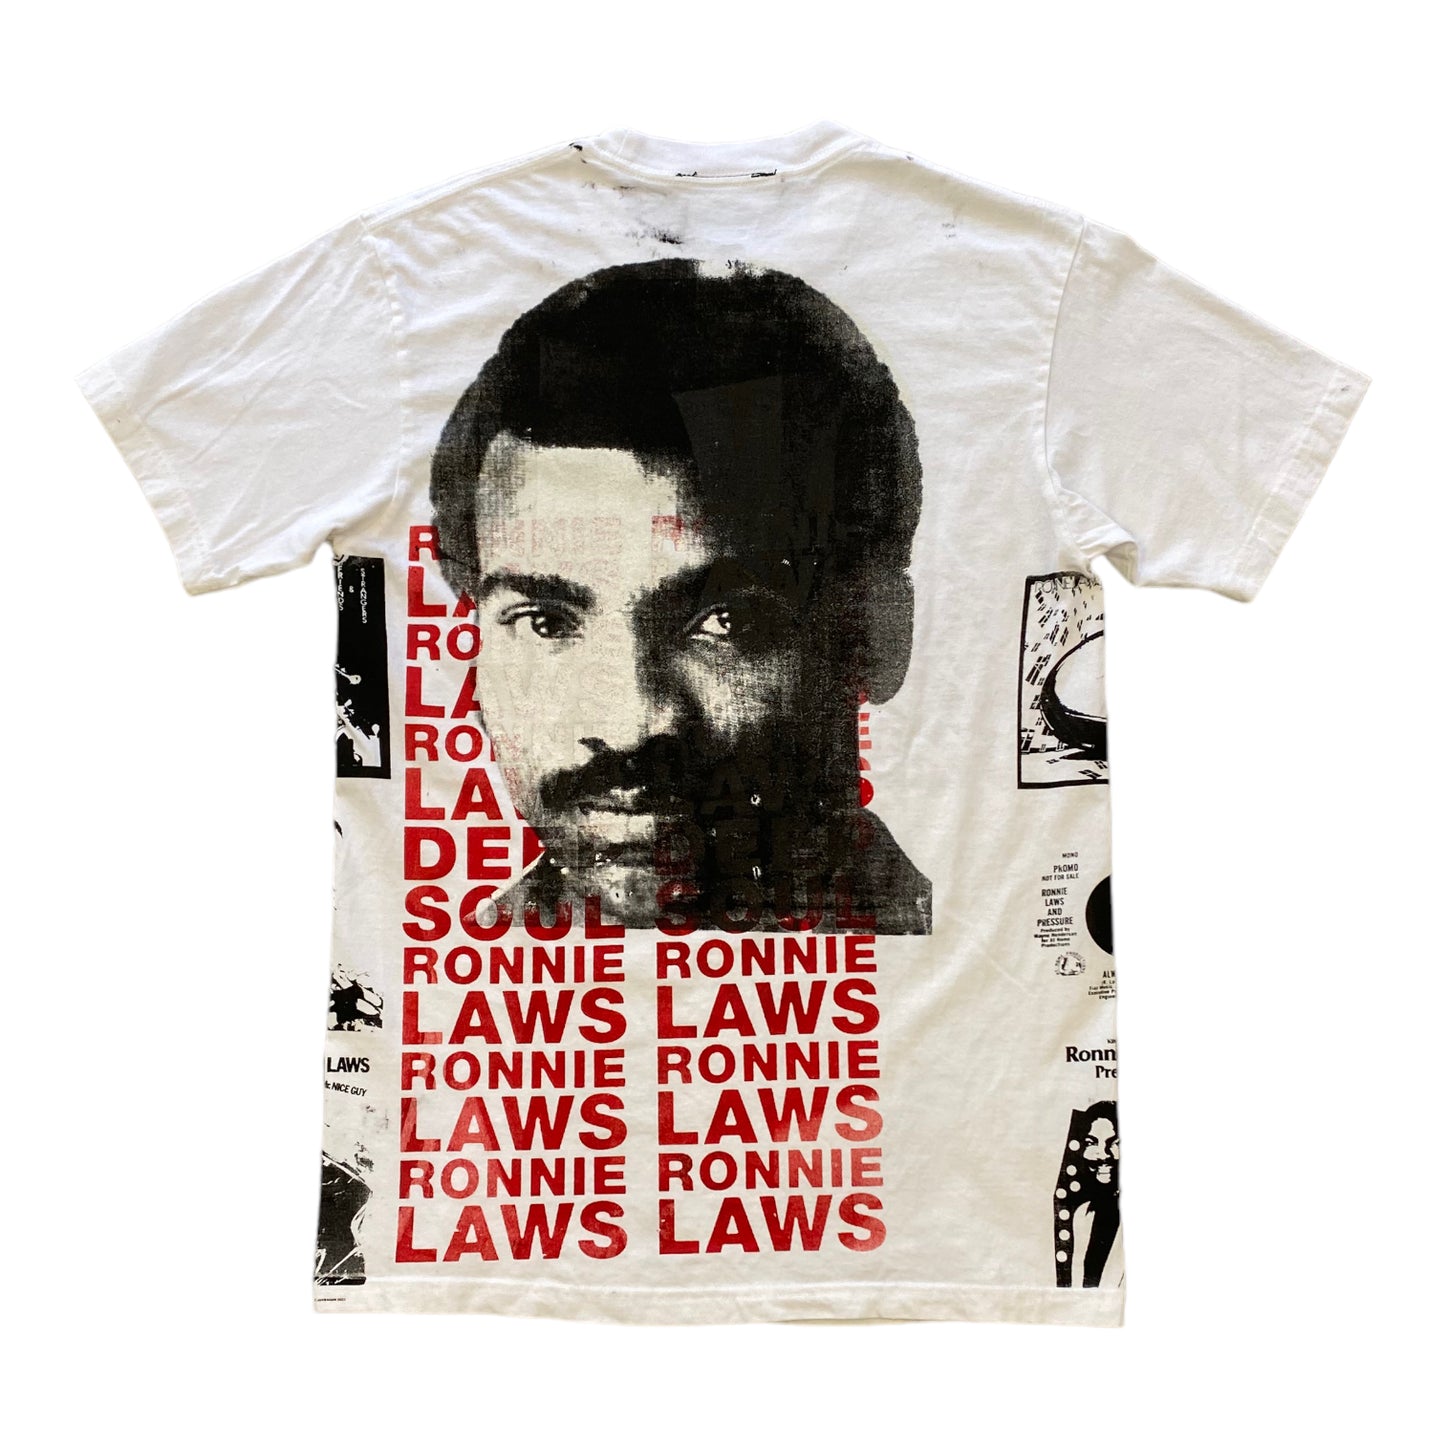 Ronnie Laws Classic albums shirt